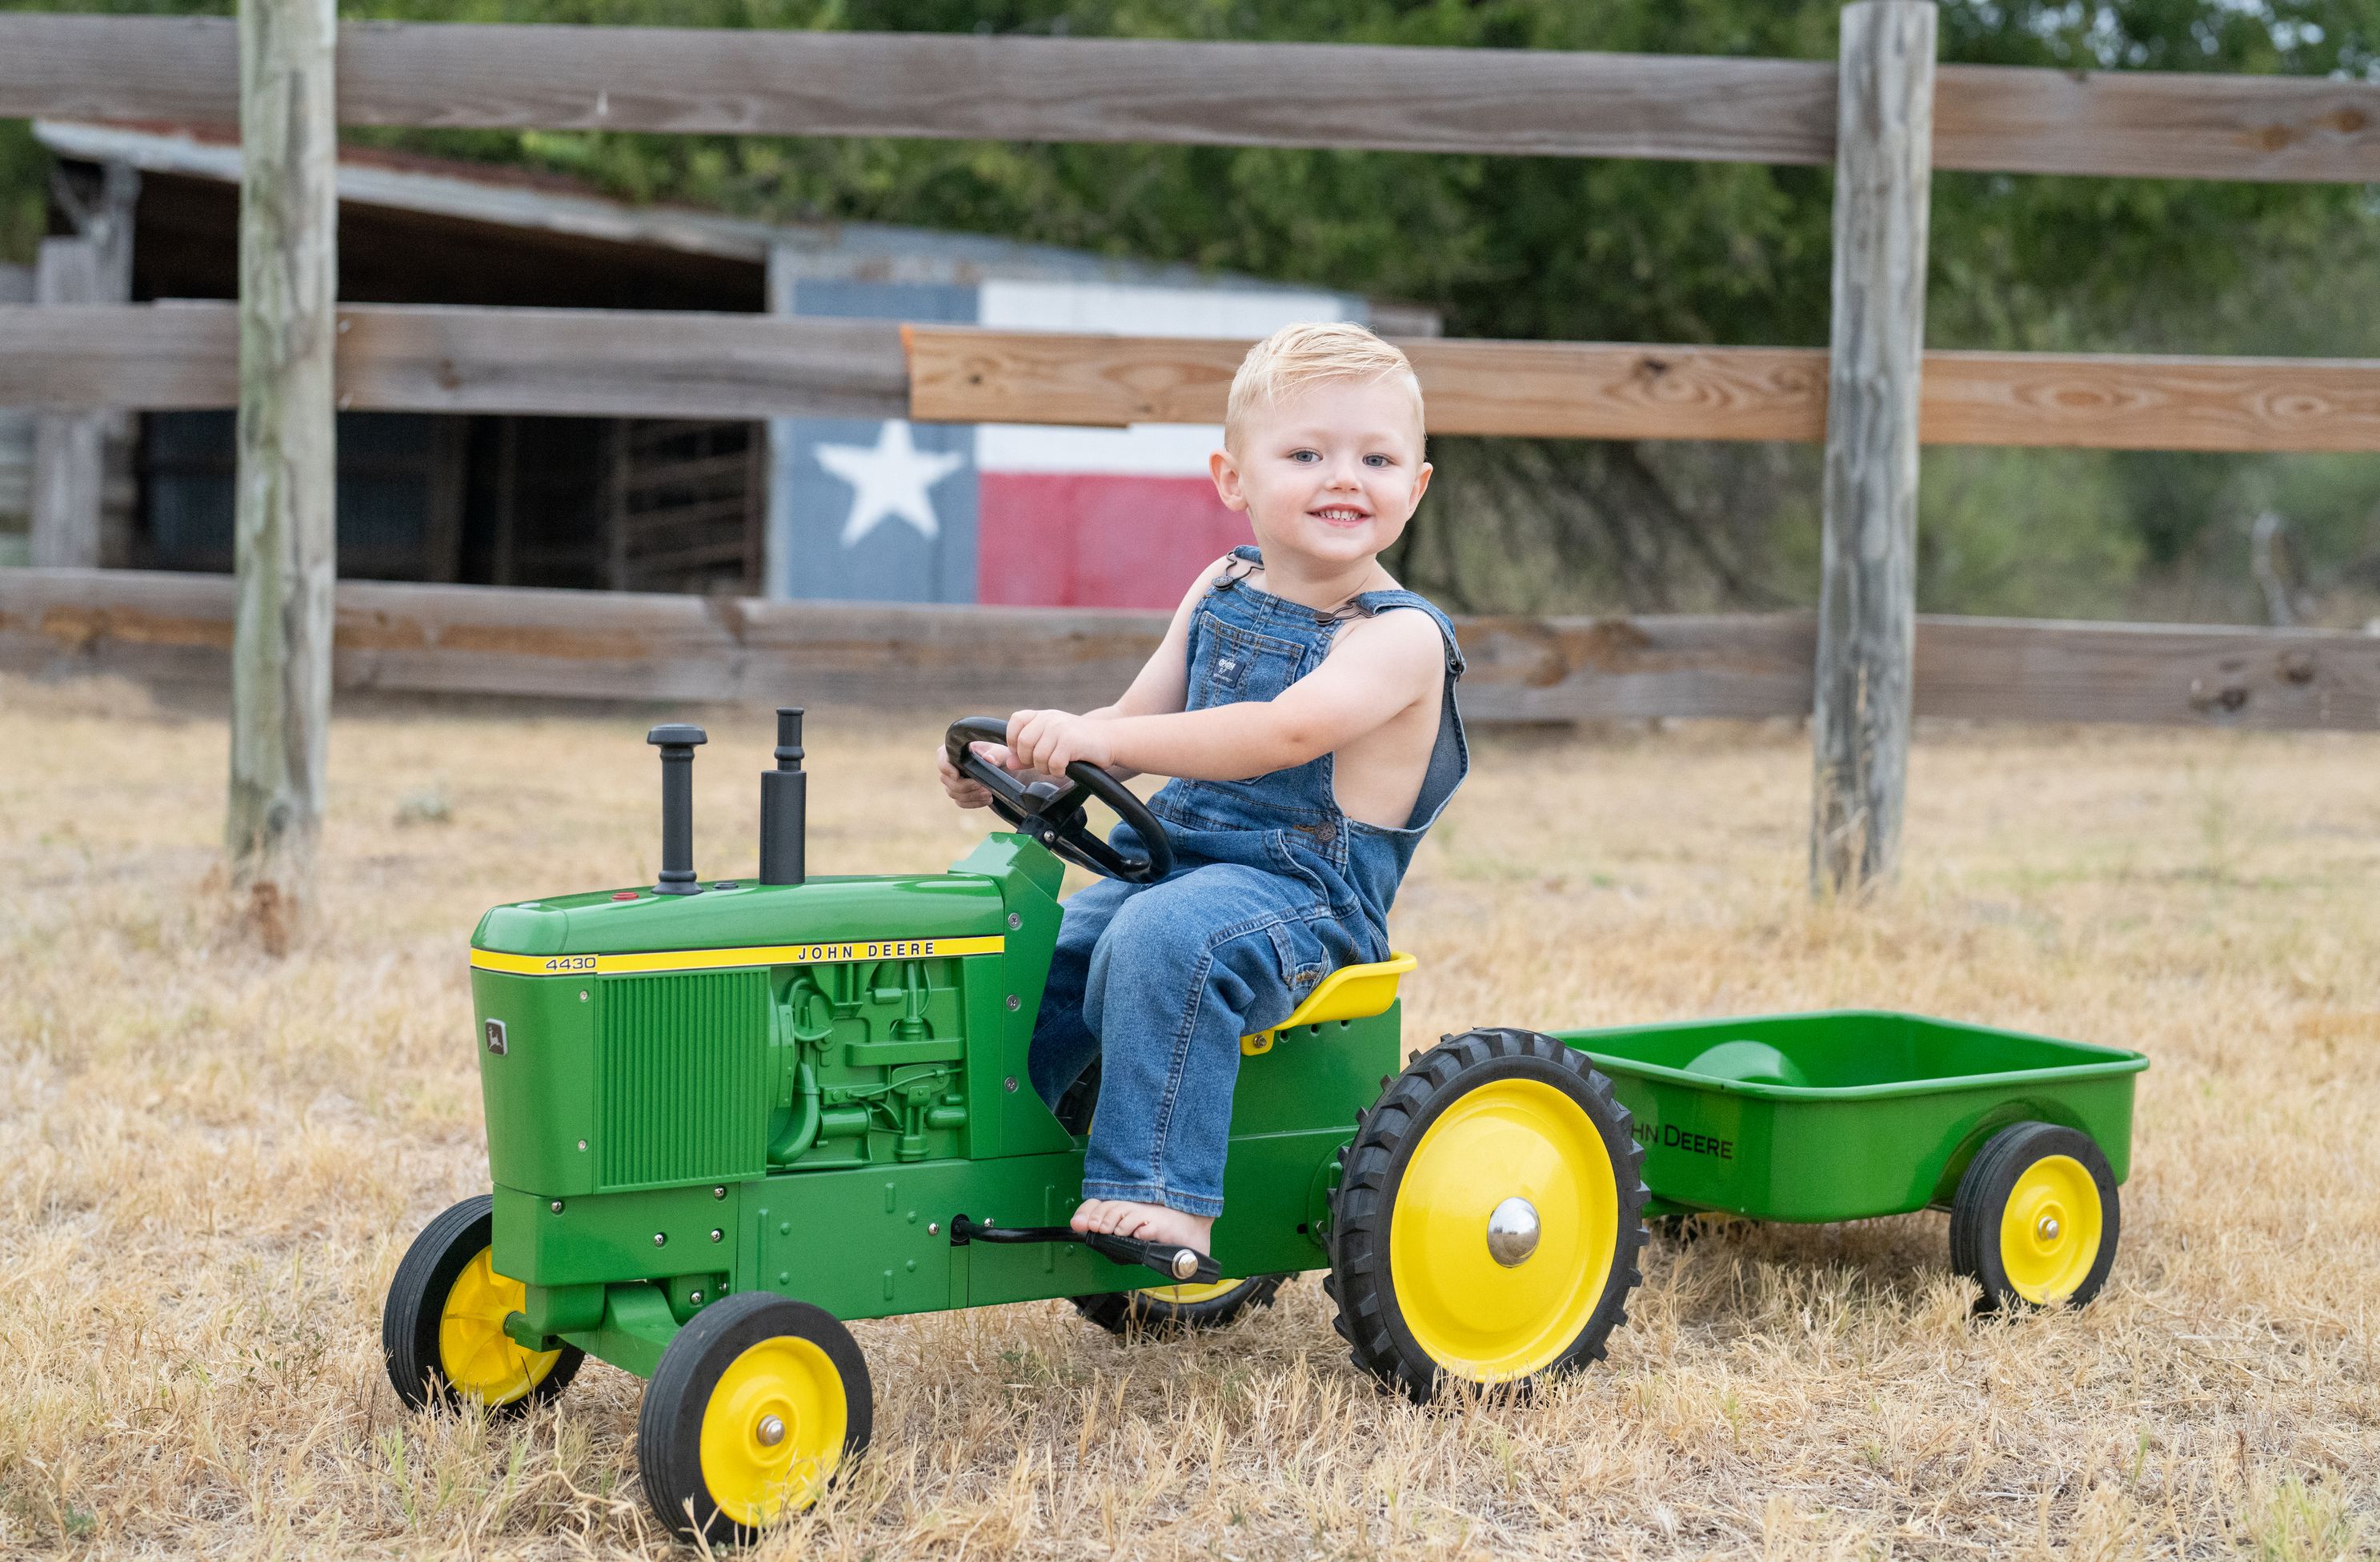 Toddler tractor photos 3 year old in blue jean overalls with Texas Flag in background